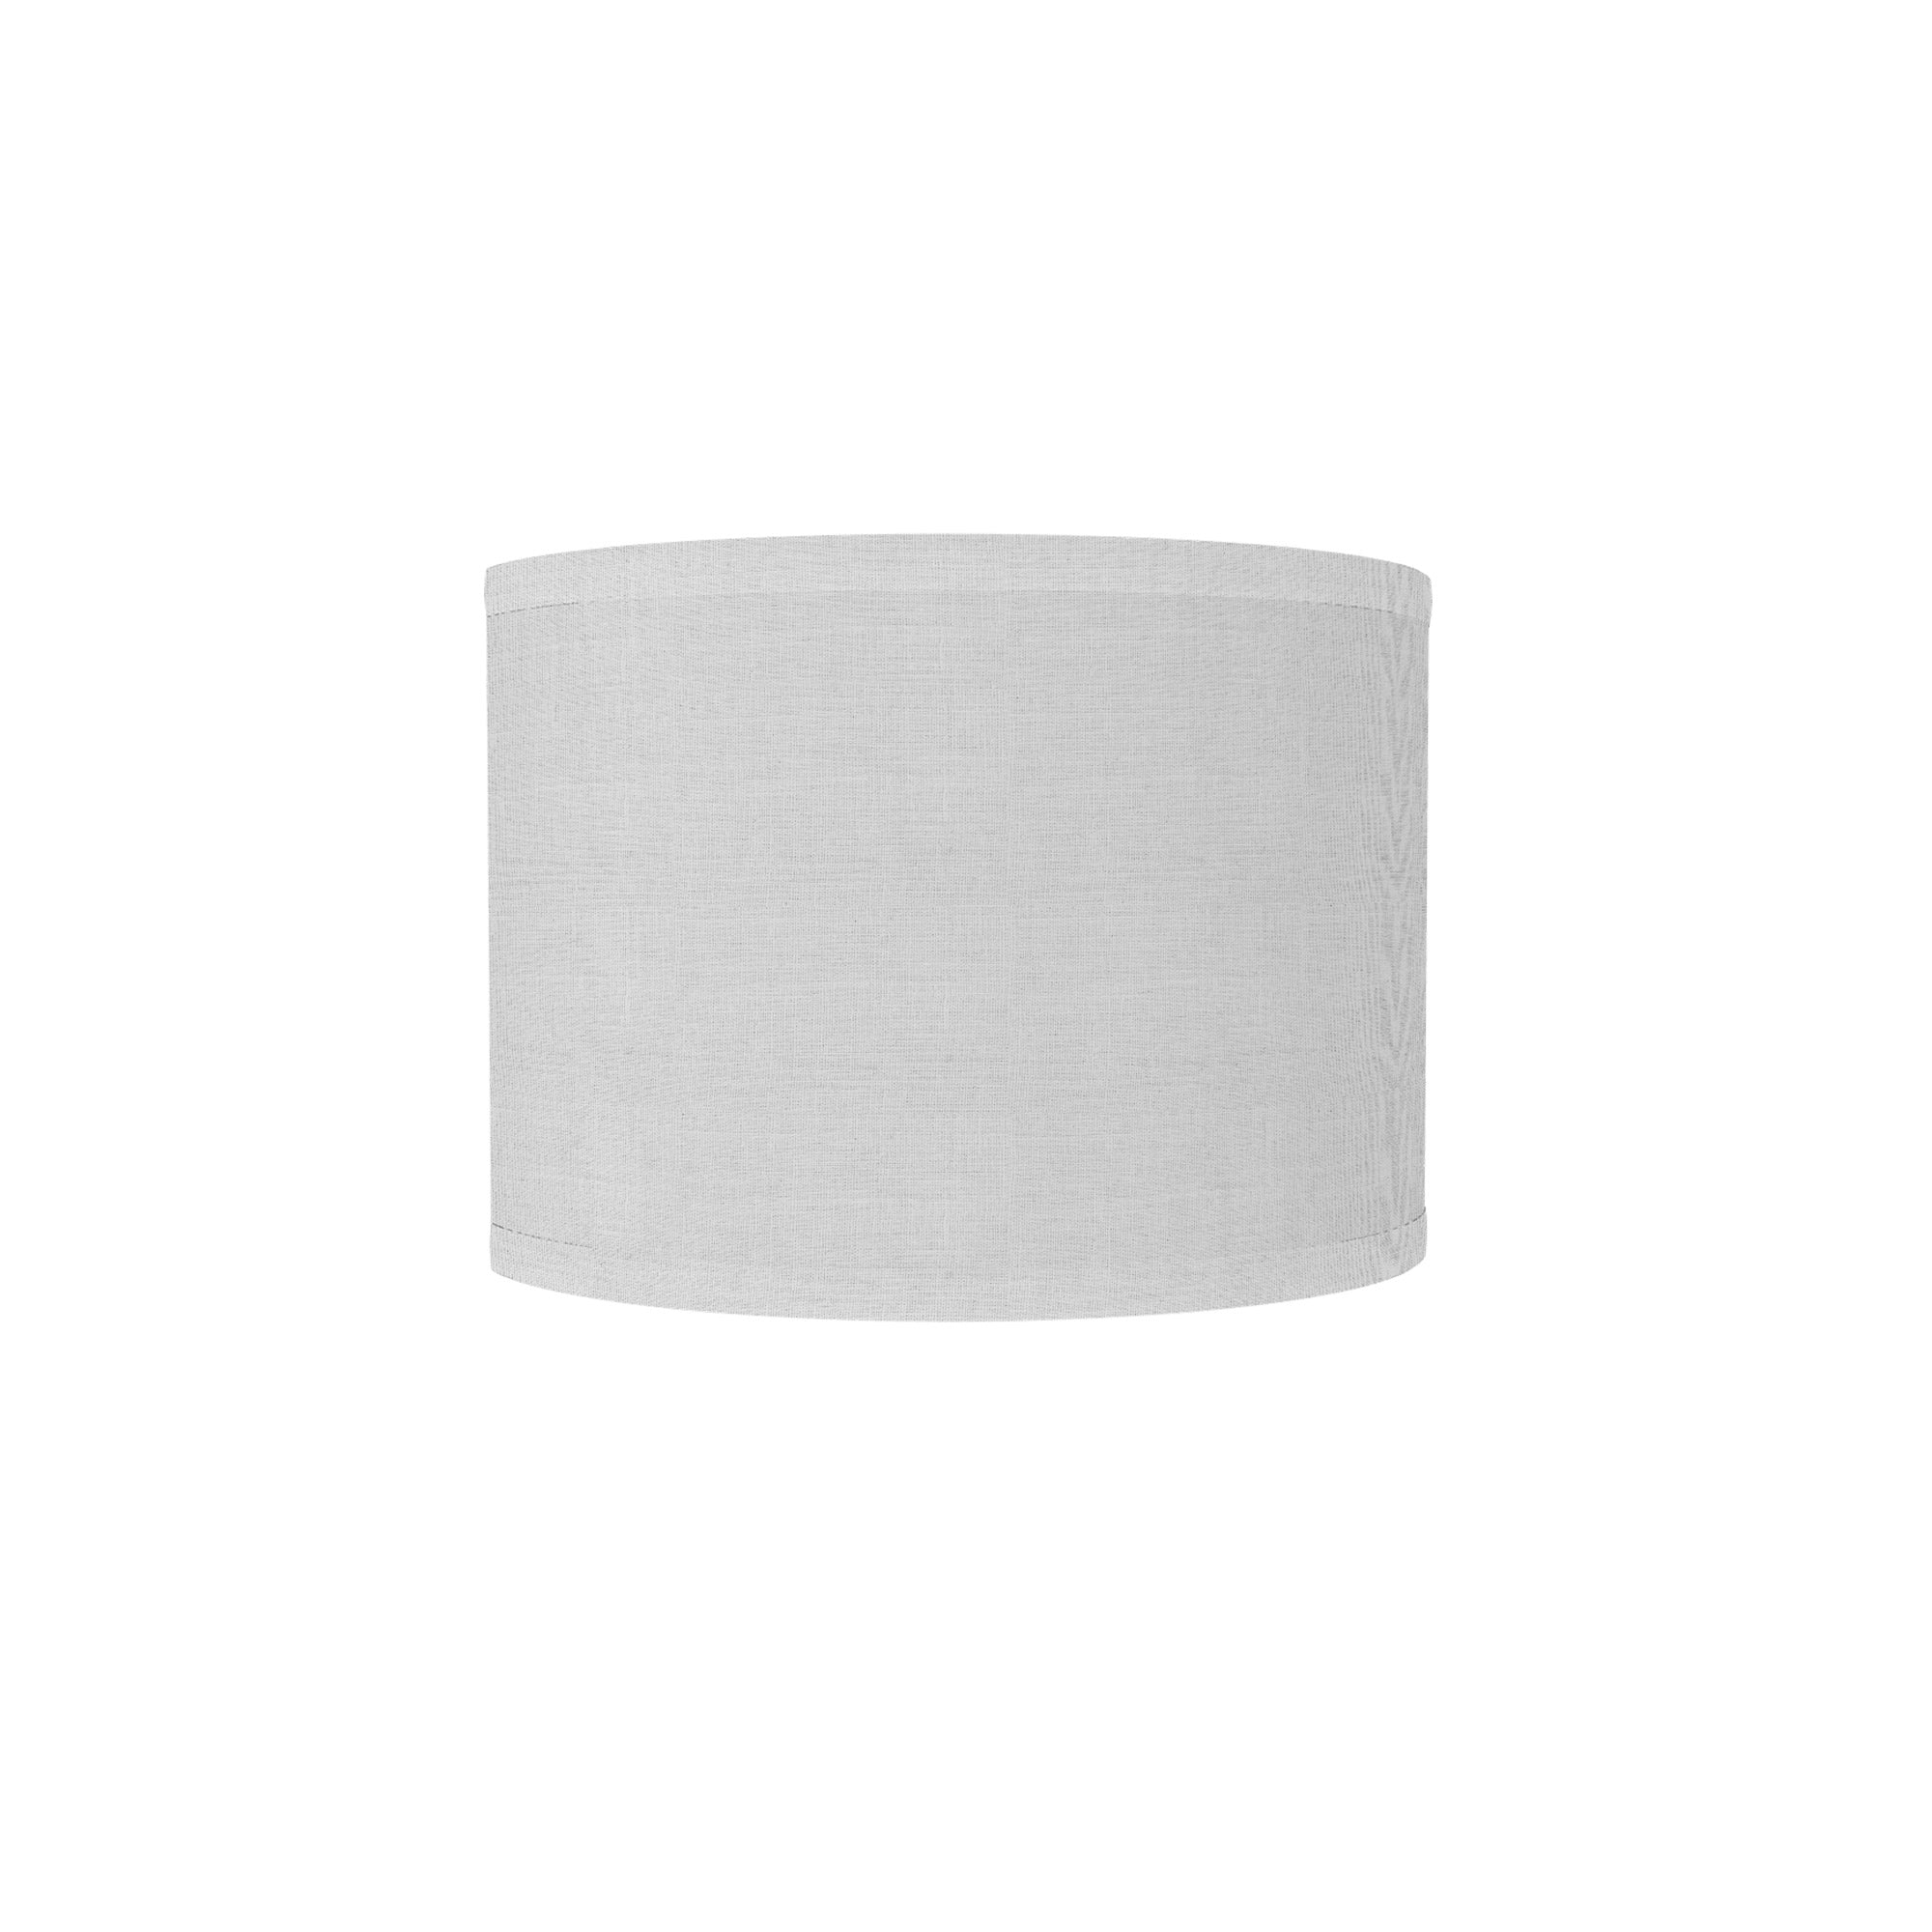 The Bryce Wall Sconce from Seascape Fixtures with a linen shade in white color.